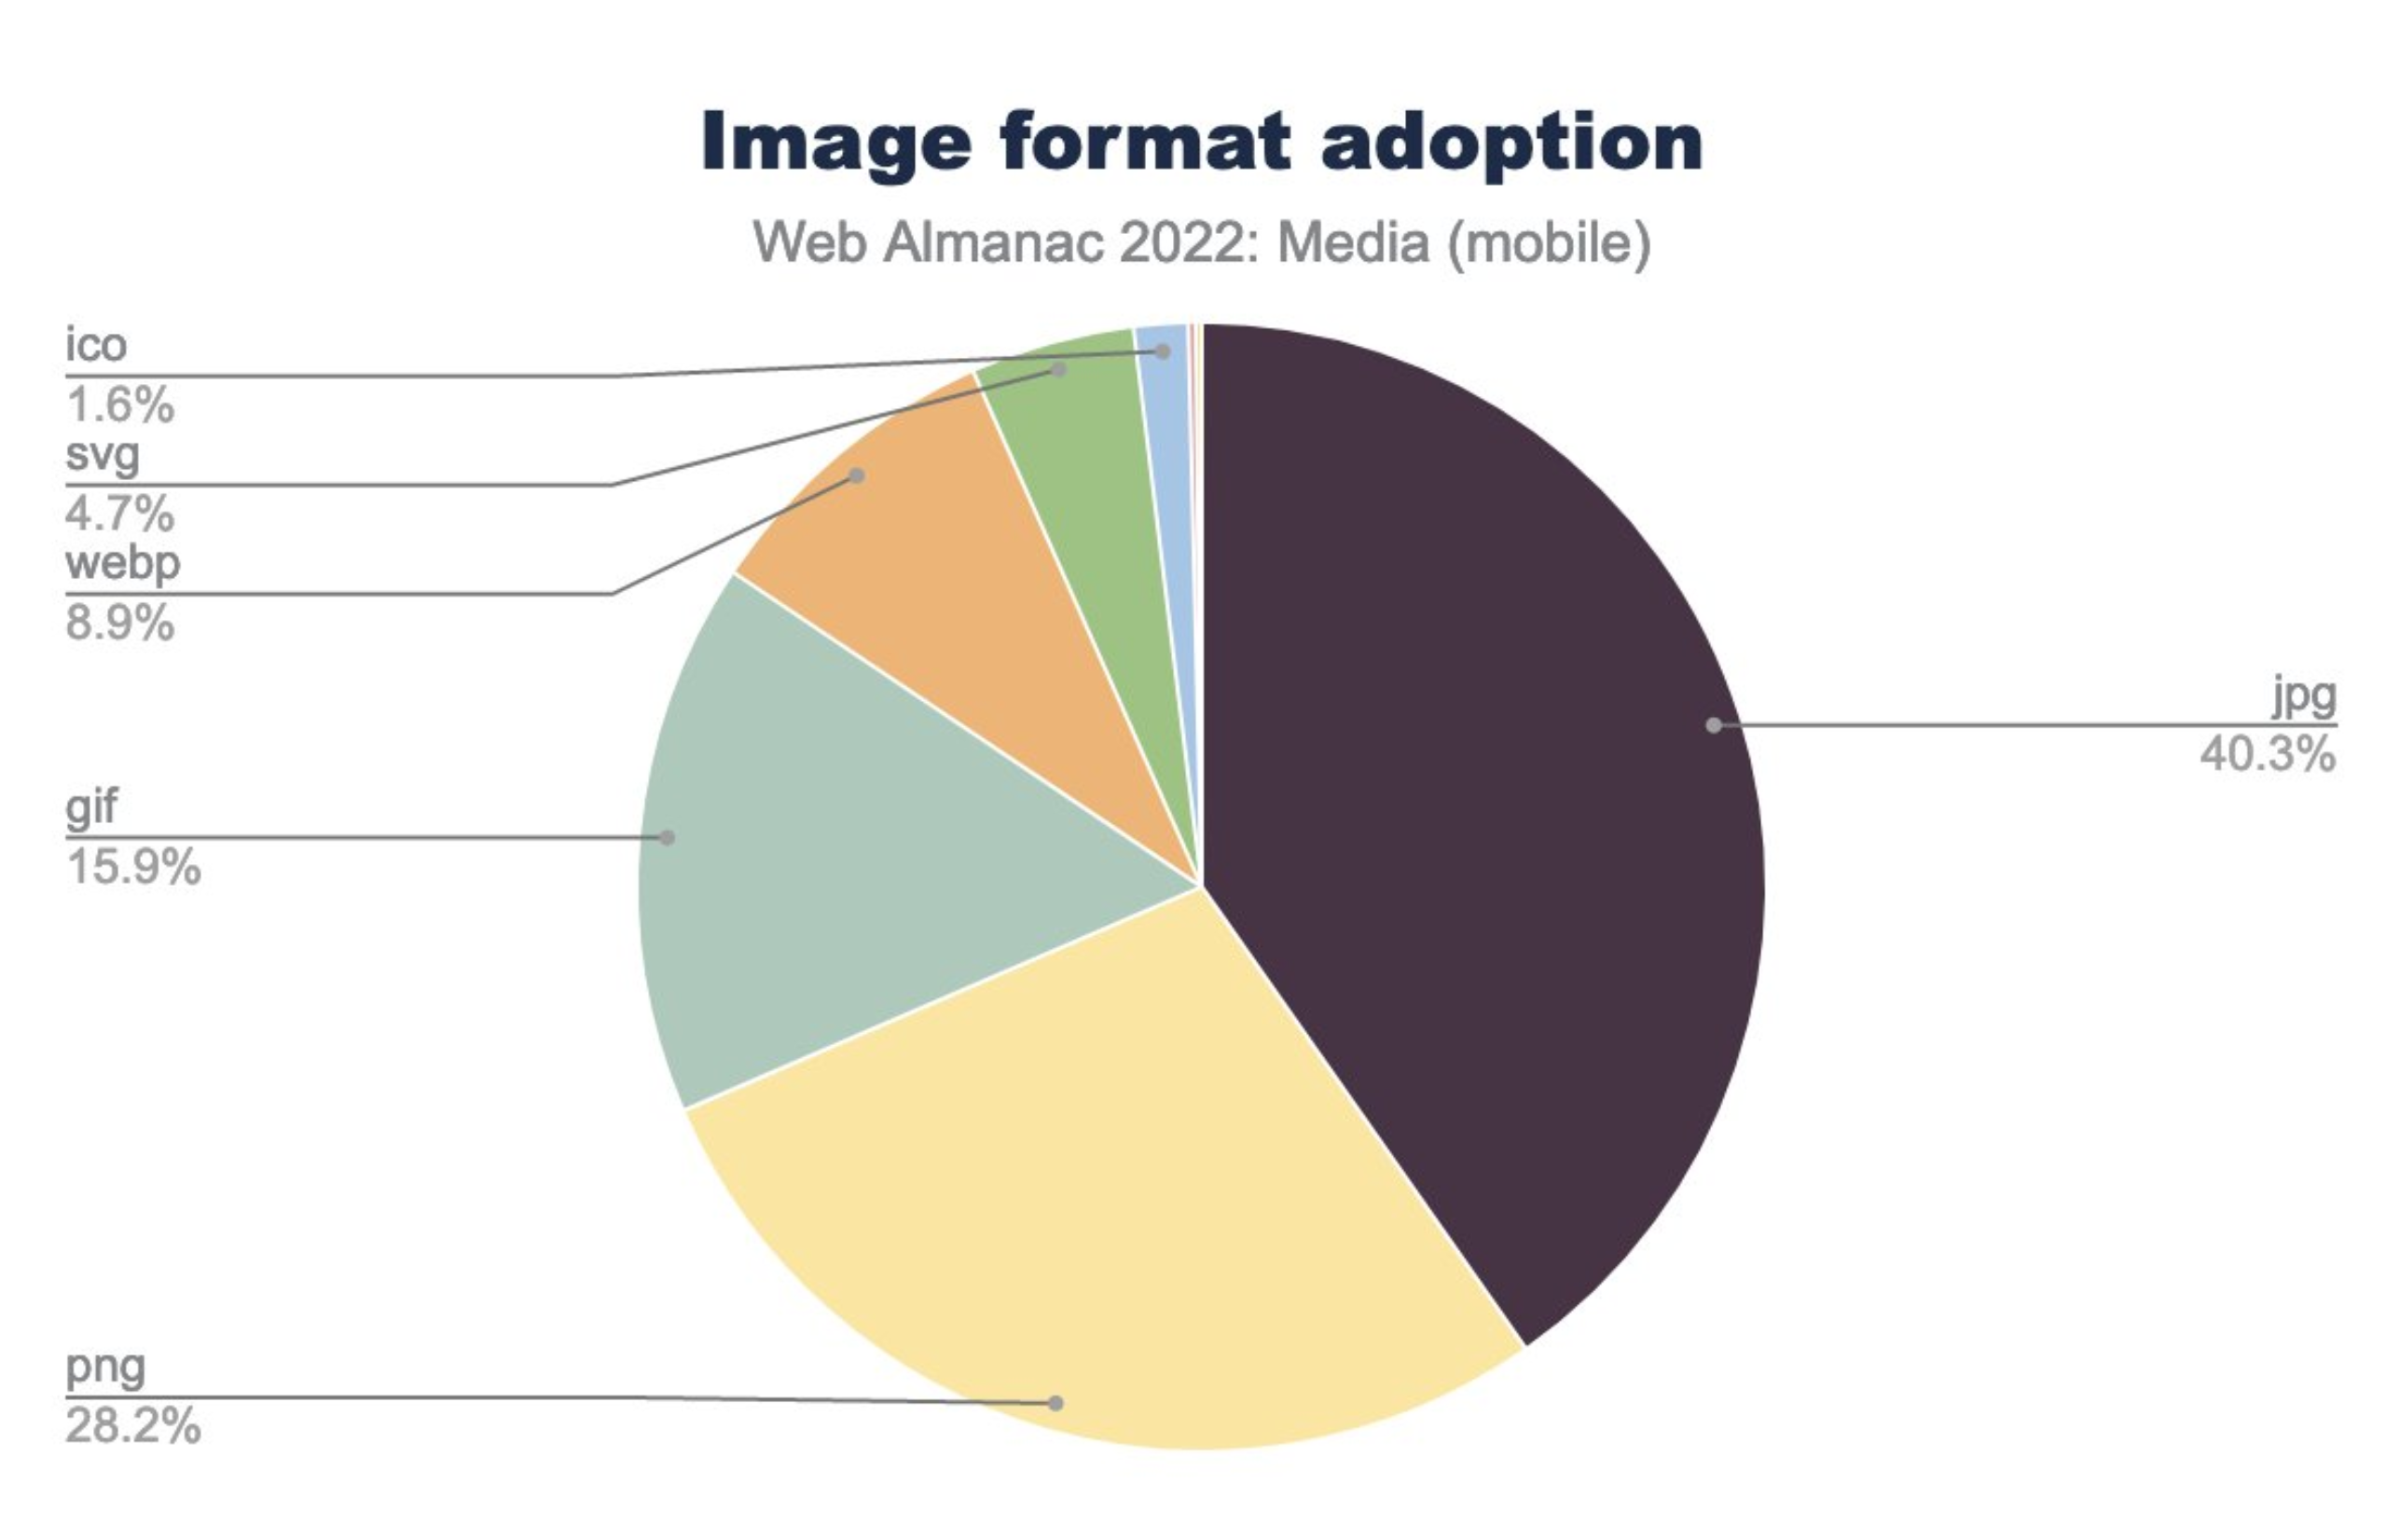 Graph showing the adoption of webp at 8.9%.